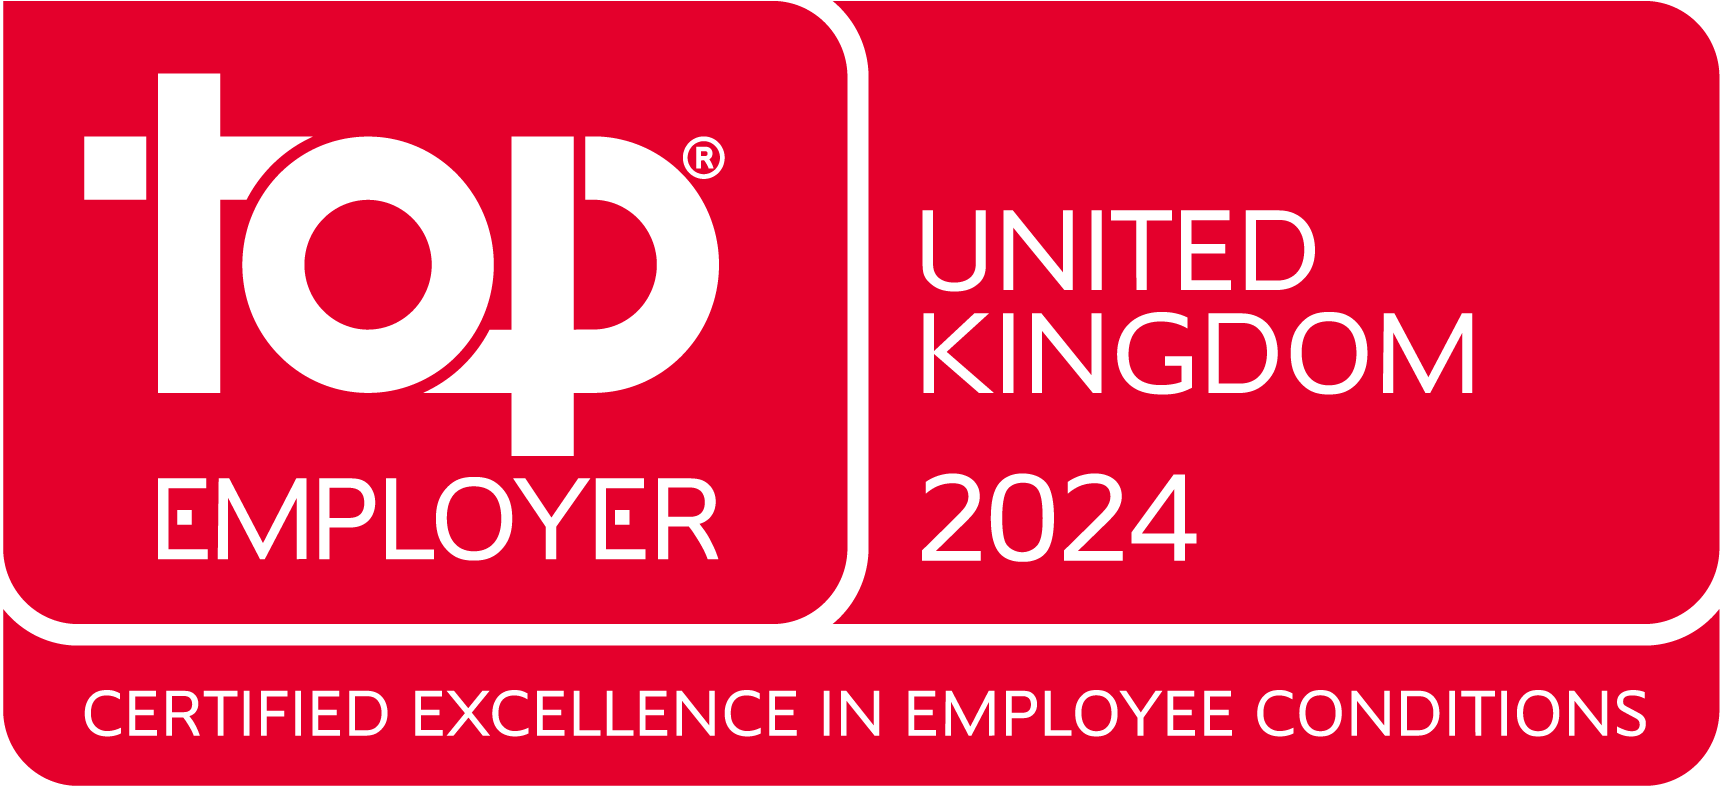 Top_Employer_United_Kingdom_2023.png